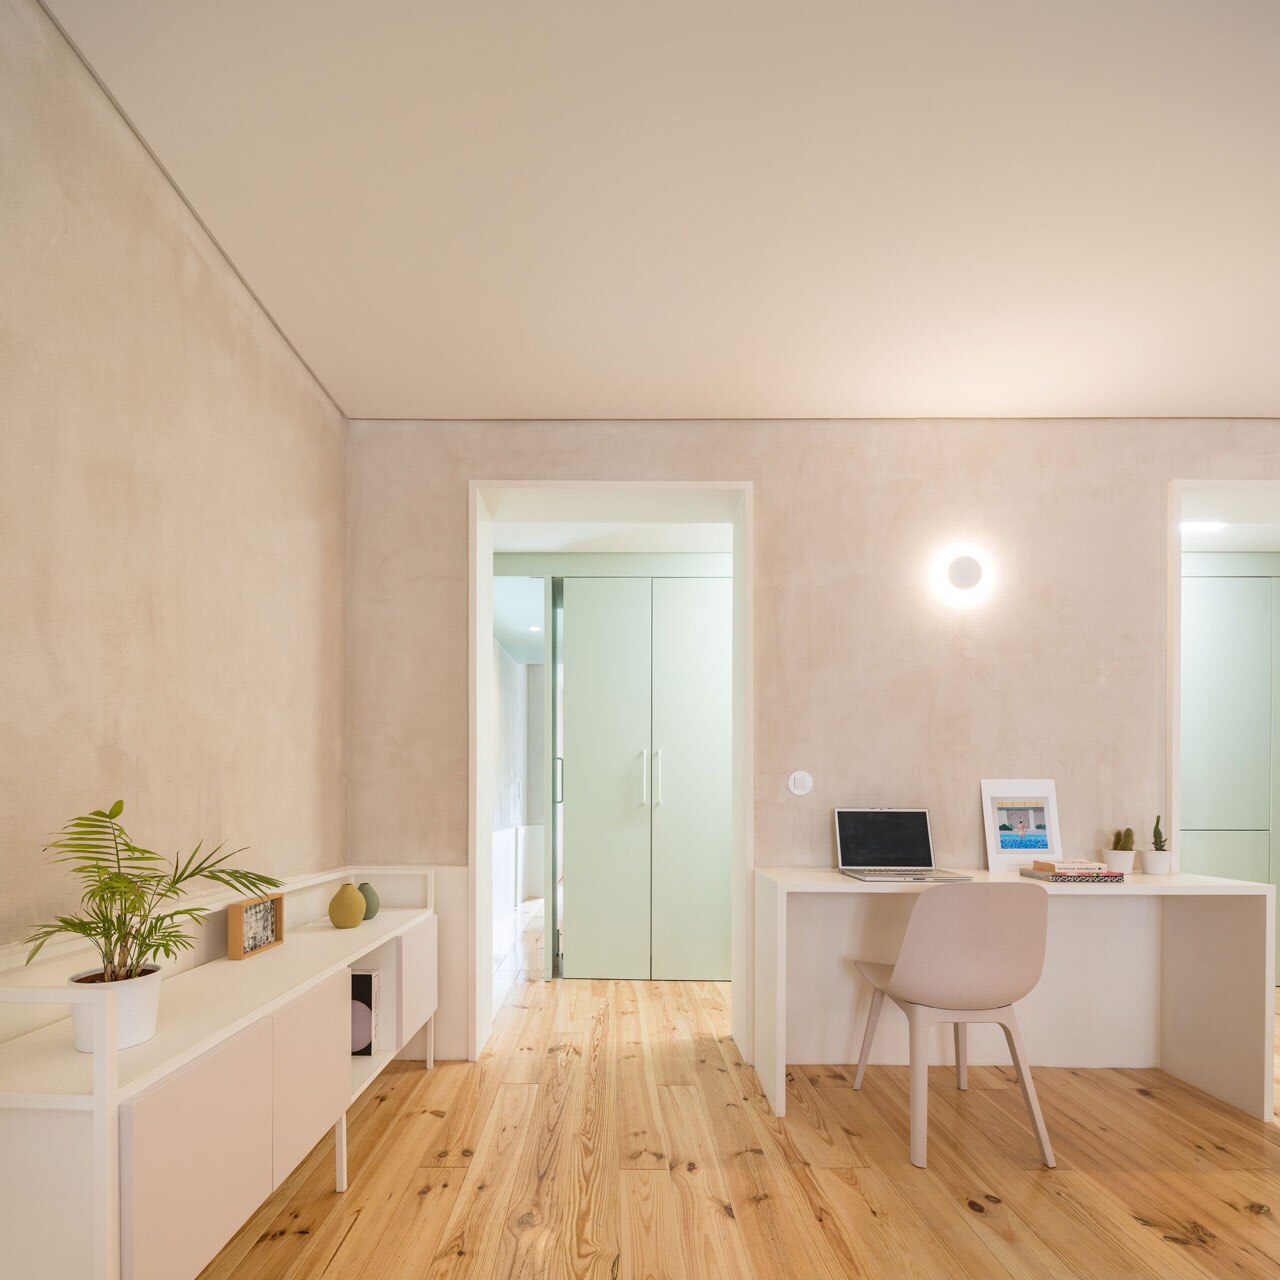 Lisbon. A small renovated apartment with an open bathroom - Domus